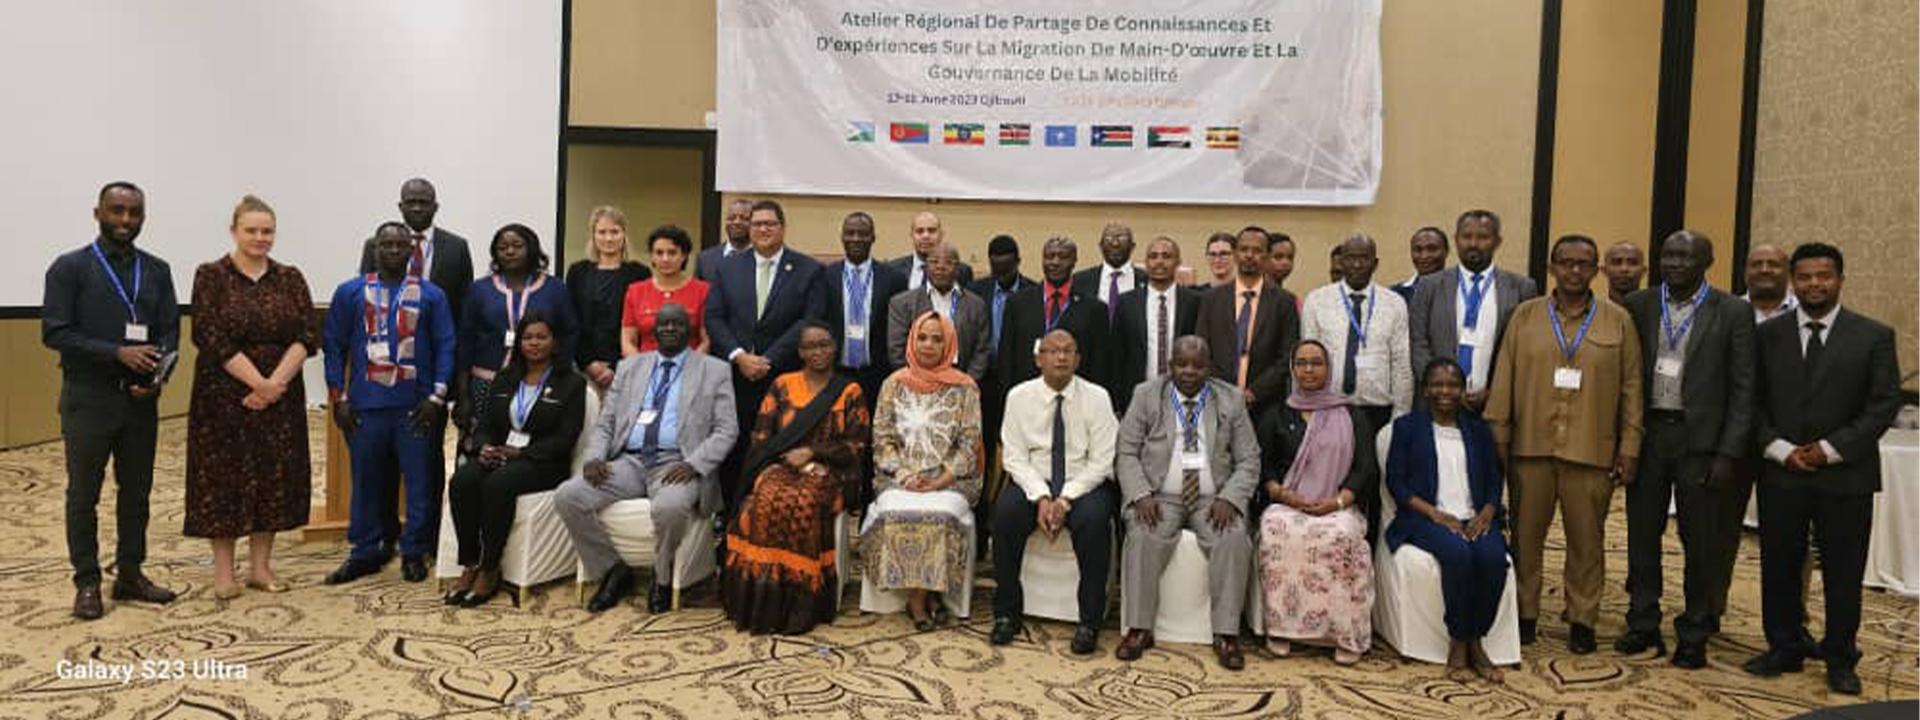 IGAD commences the regional Knowledge and Experience Sharing workshop on Labour Migration and Mobility Governance